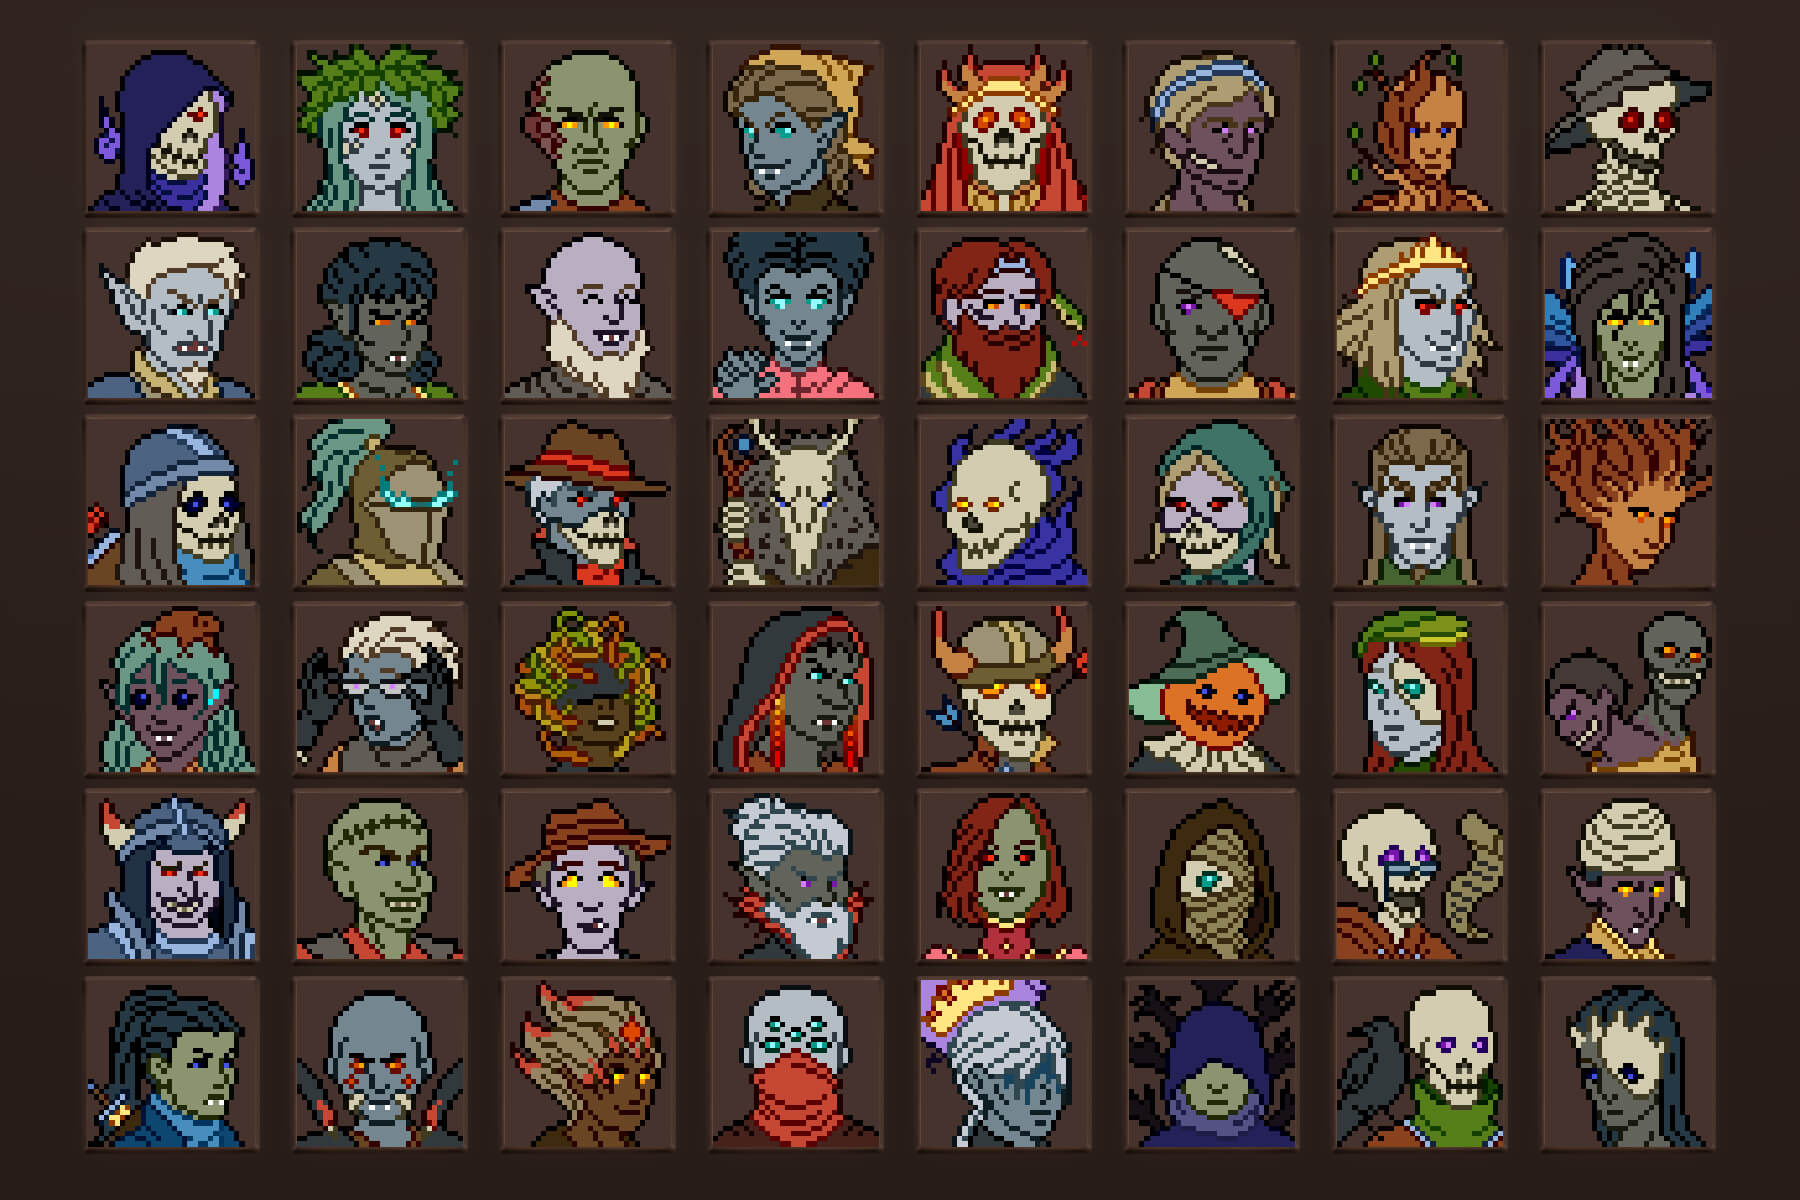 Undead Avatars 32x32 by Free Game Assets (GUI, Sprite, Tilesets)